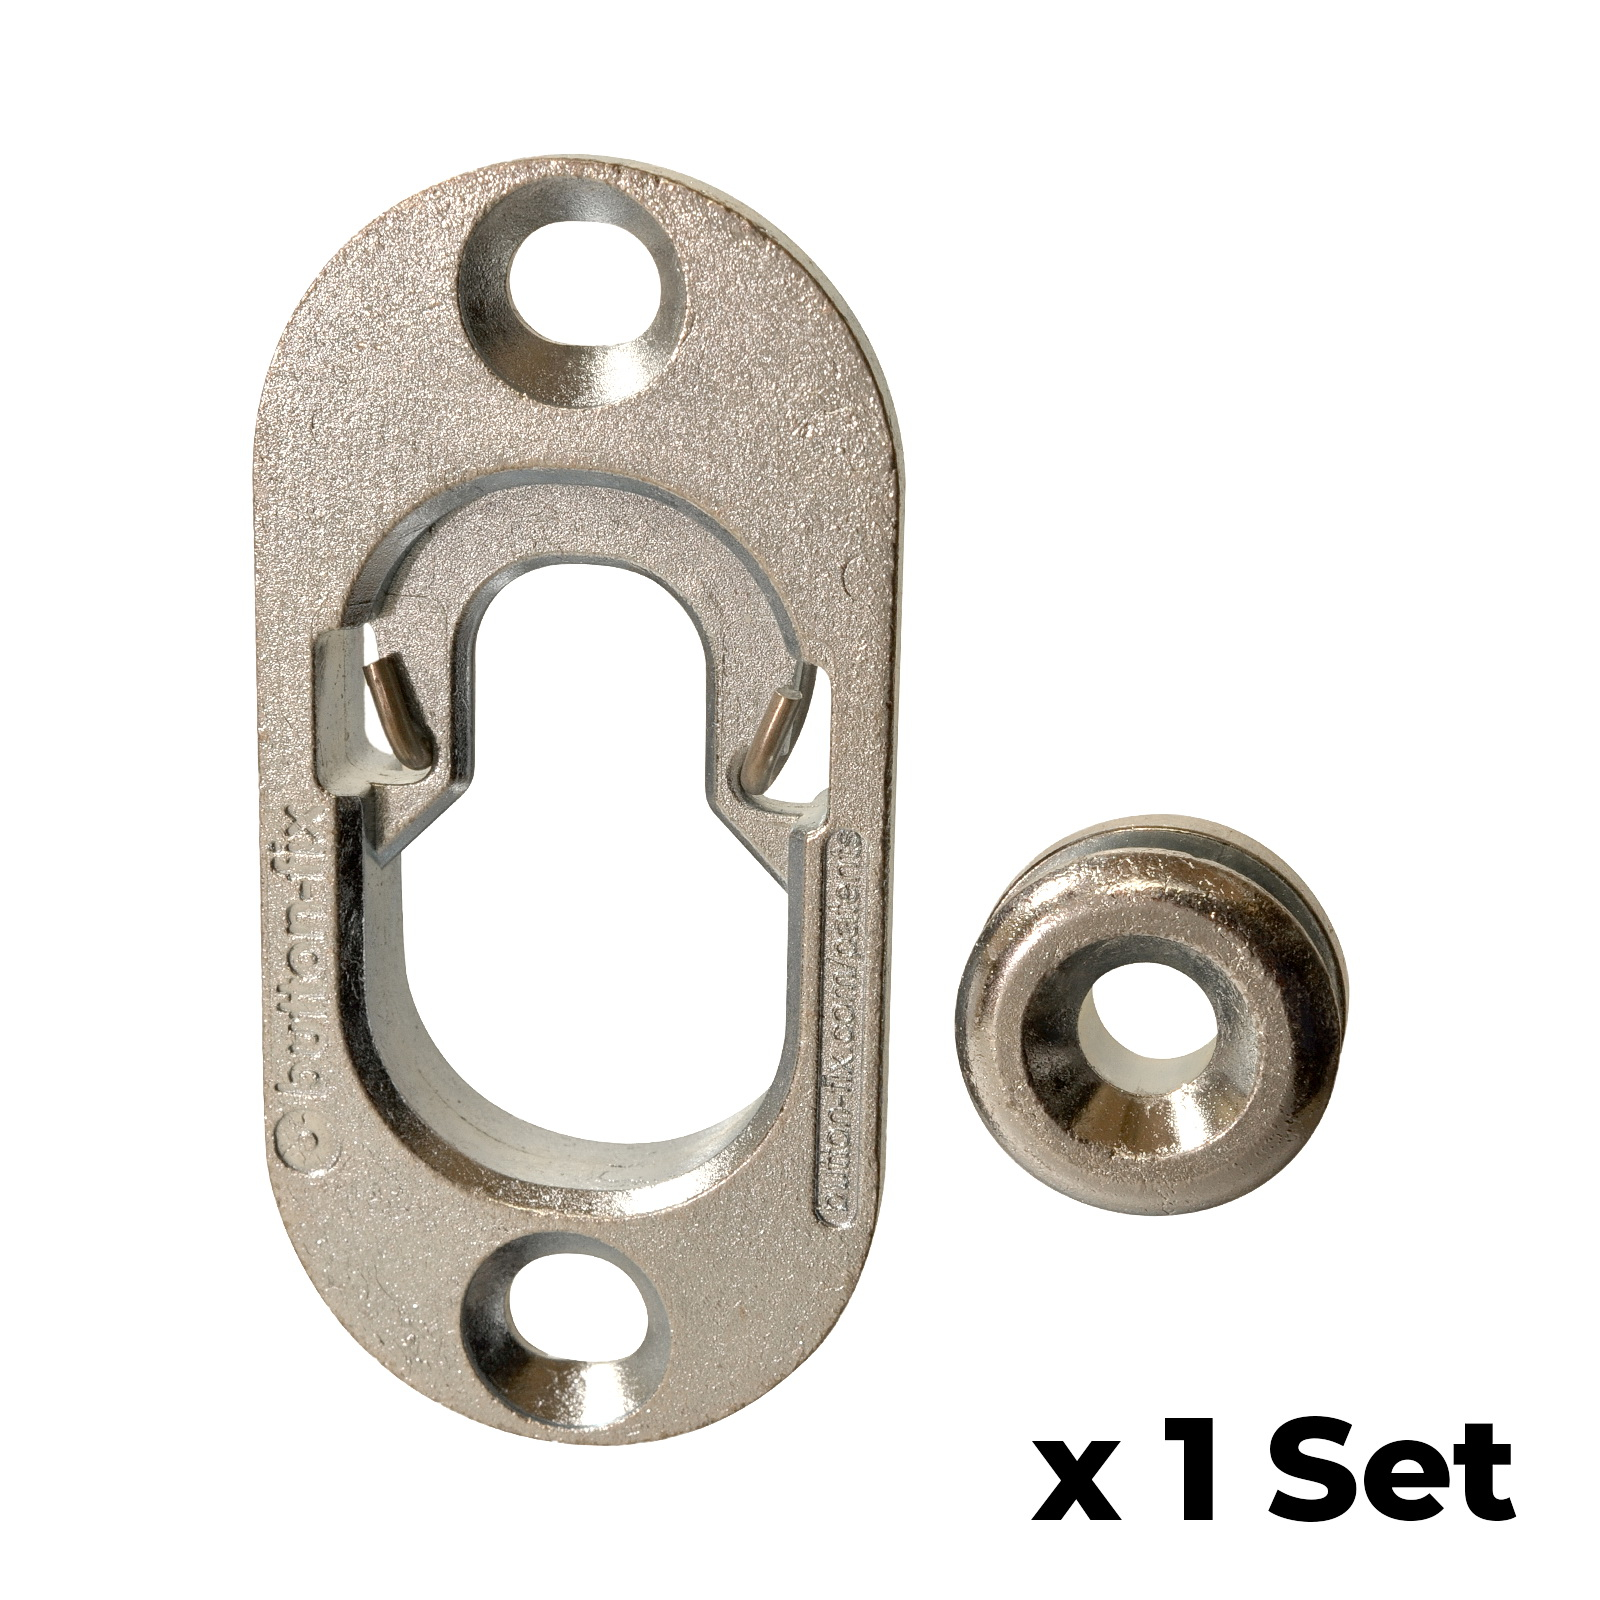 Button Fix Type 1 Metal Fix Bracket Fixing with Stainless Steel Retaining Spring for Fire Retardant Panels, Marine Interiors, Vibration & Shock Tested x1